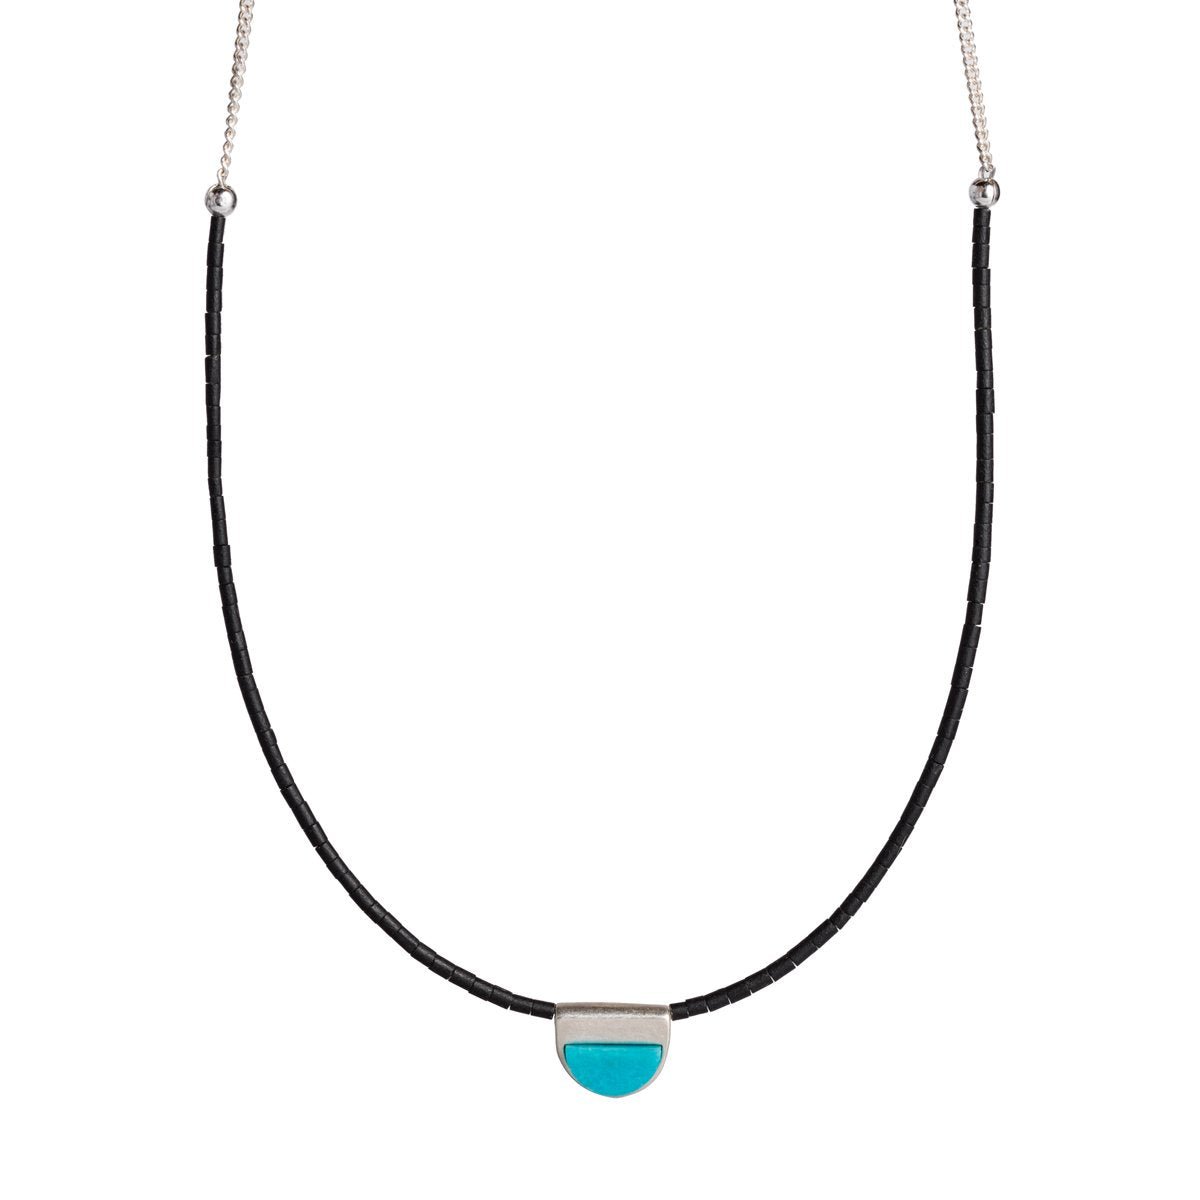 Inti necklace in sterling silver, focus on Kingman turquoise focal piece